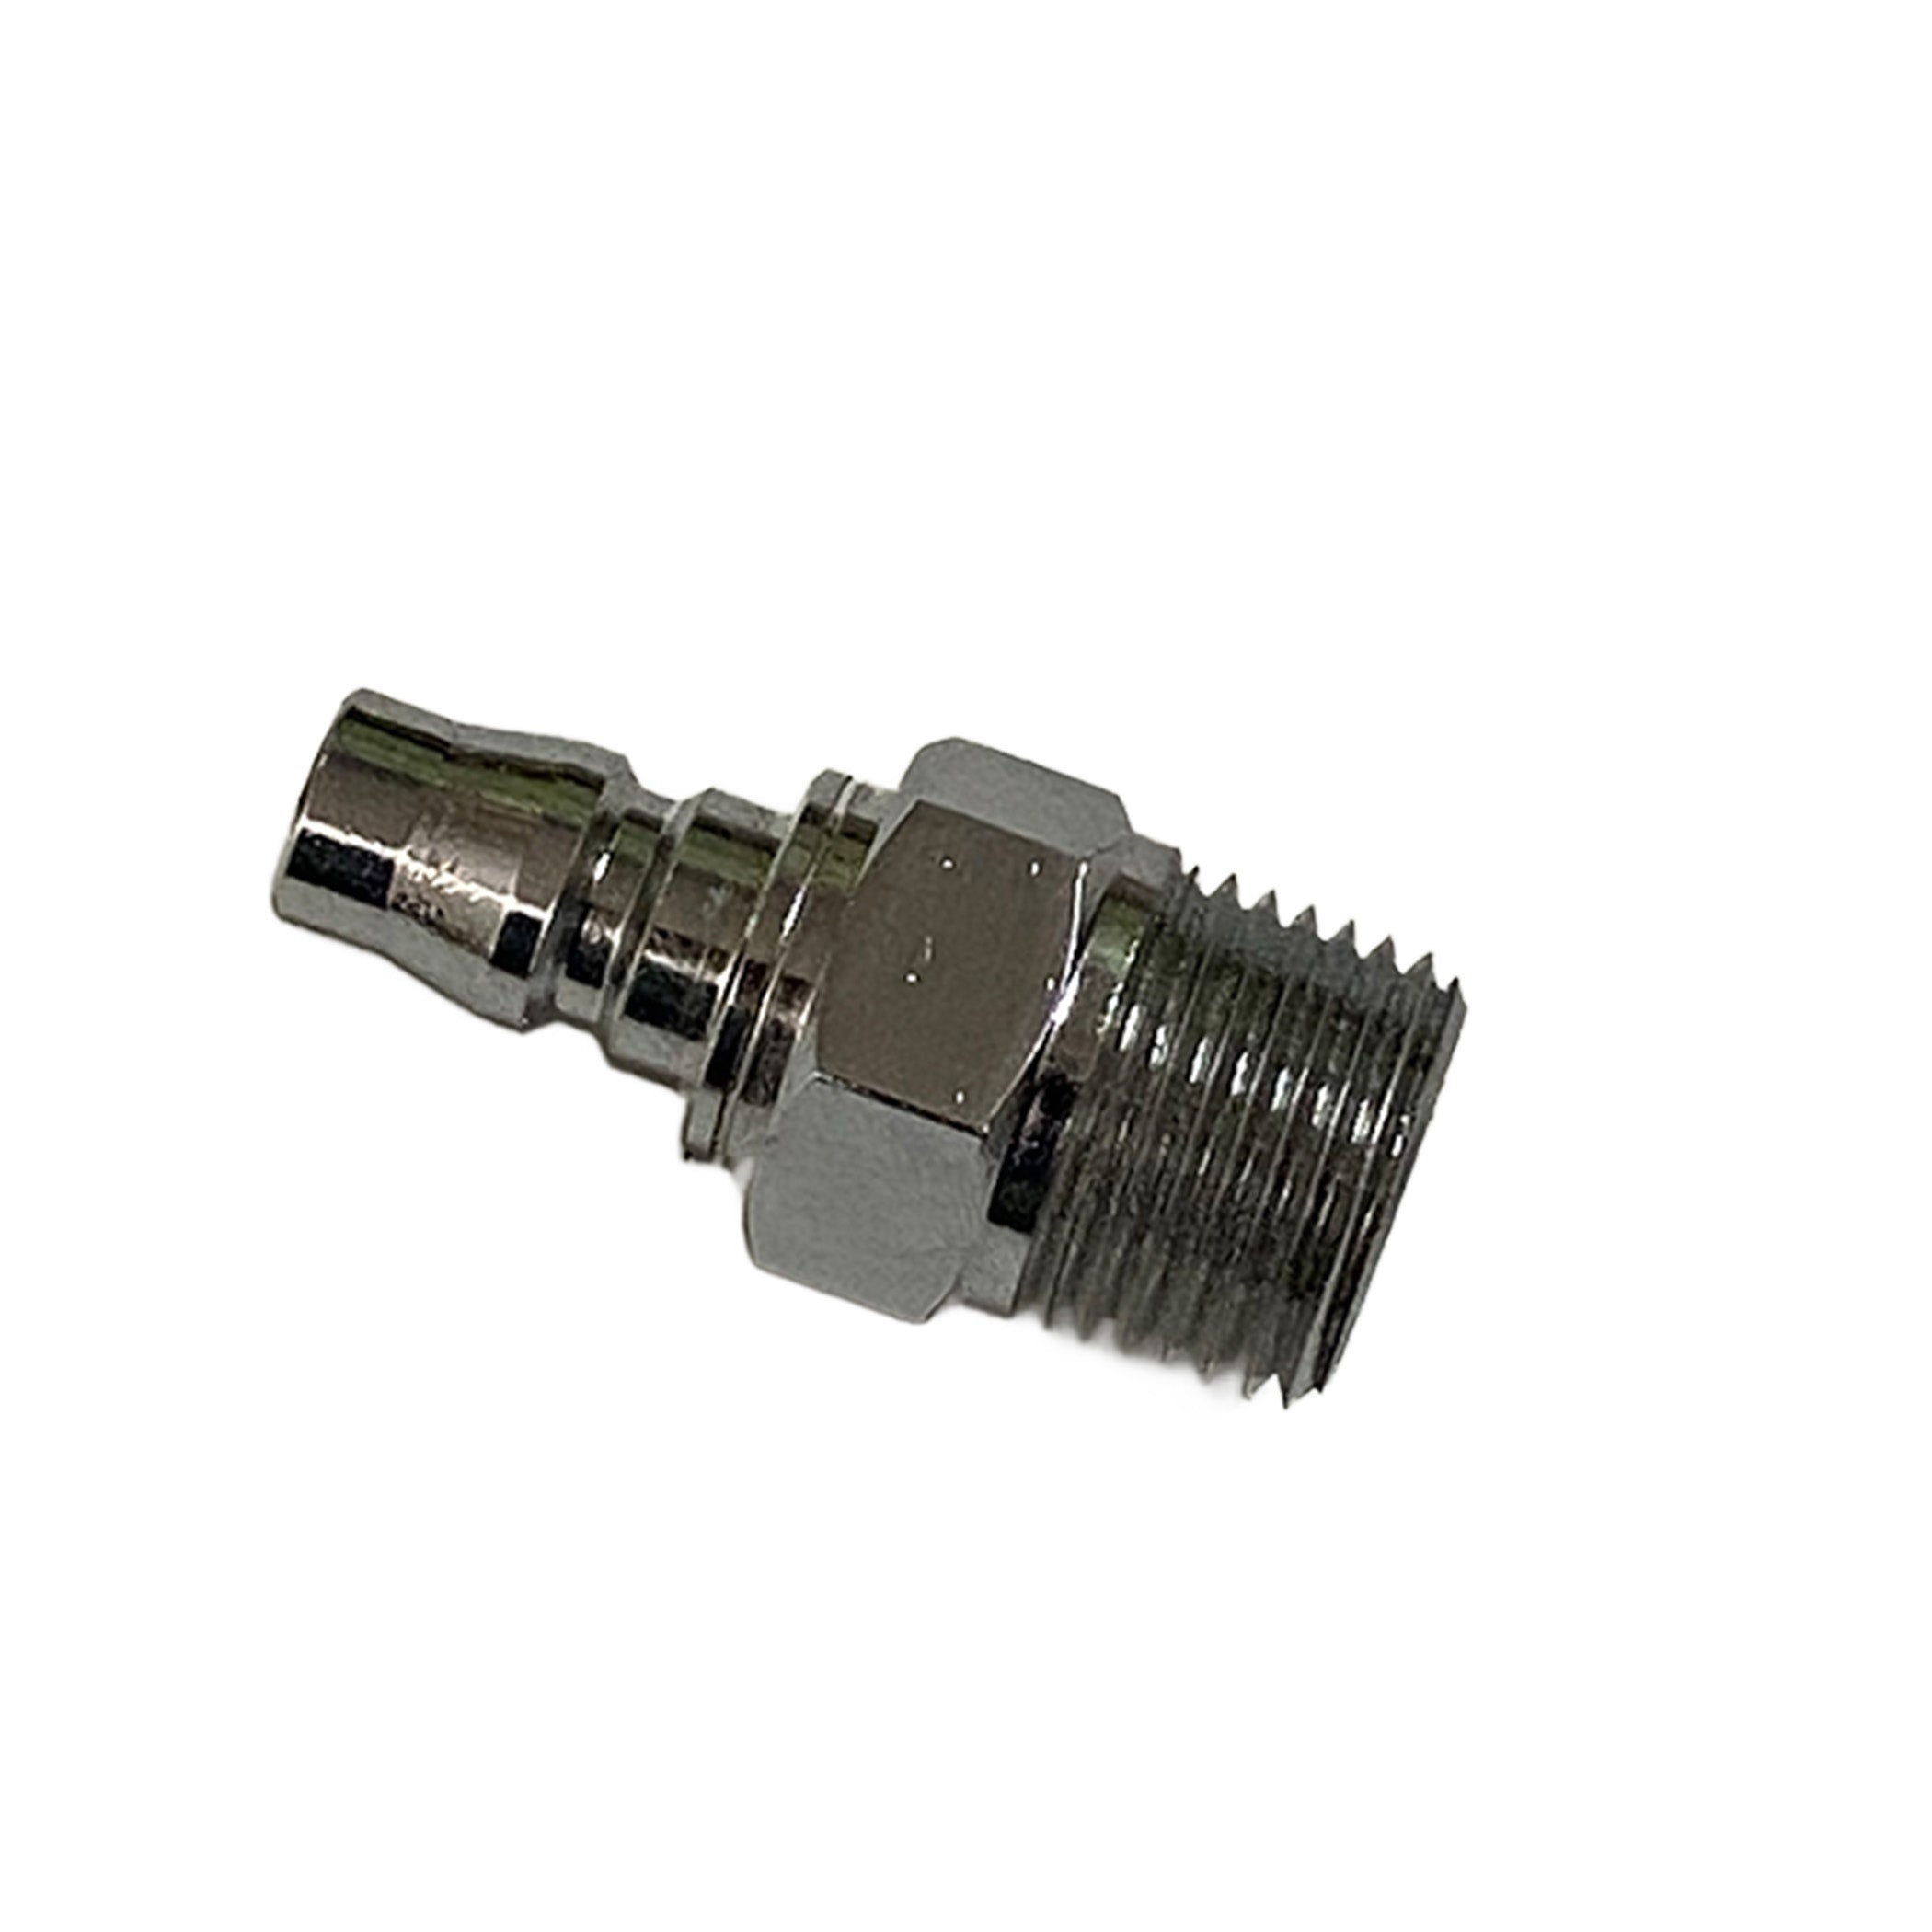 801062N - Quick Connect Shower Hose Fitting for 40707